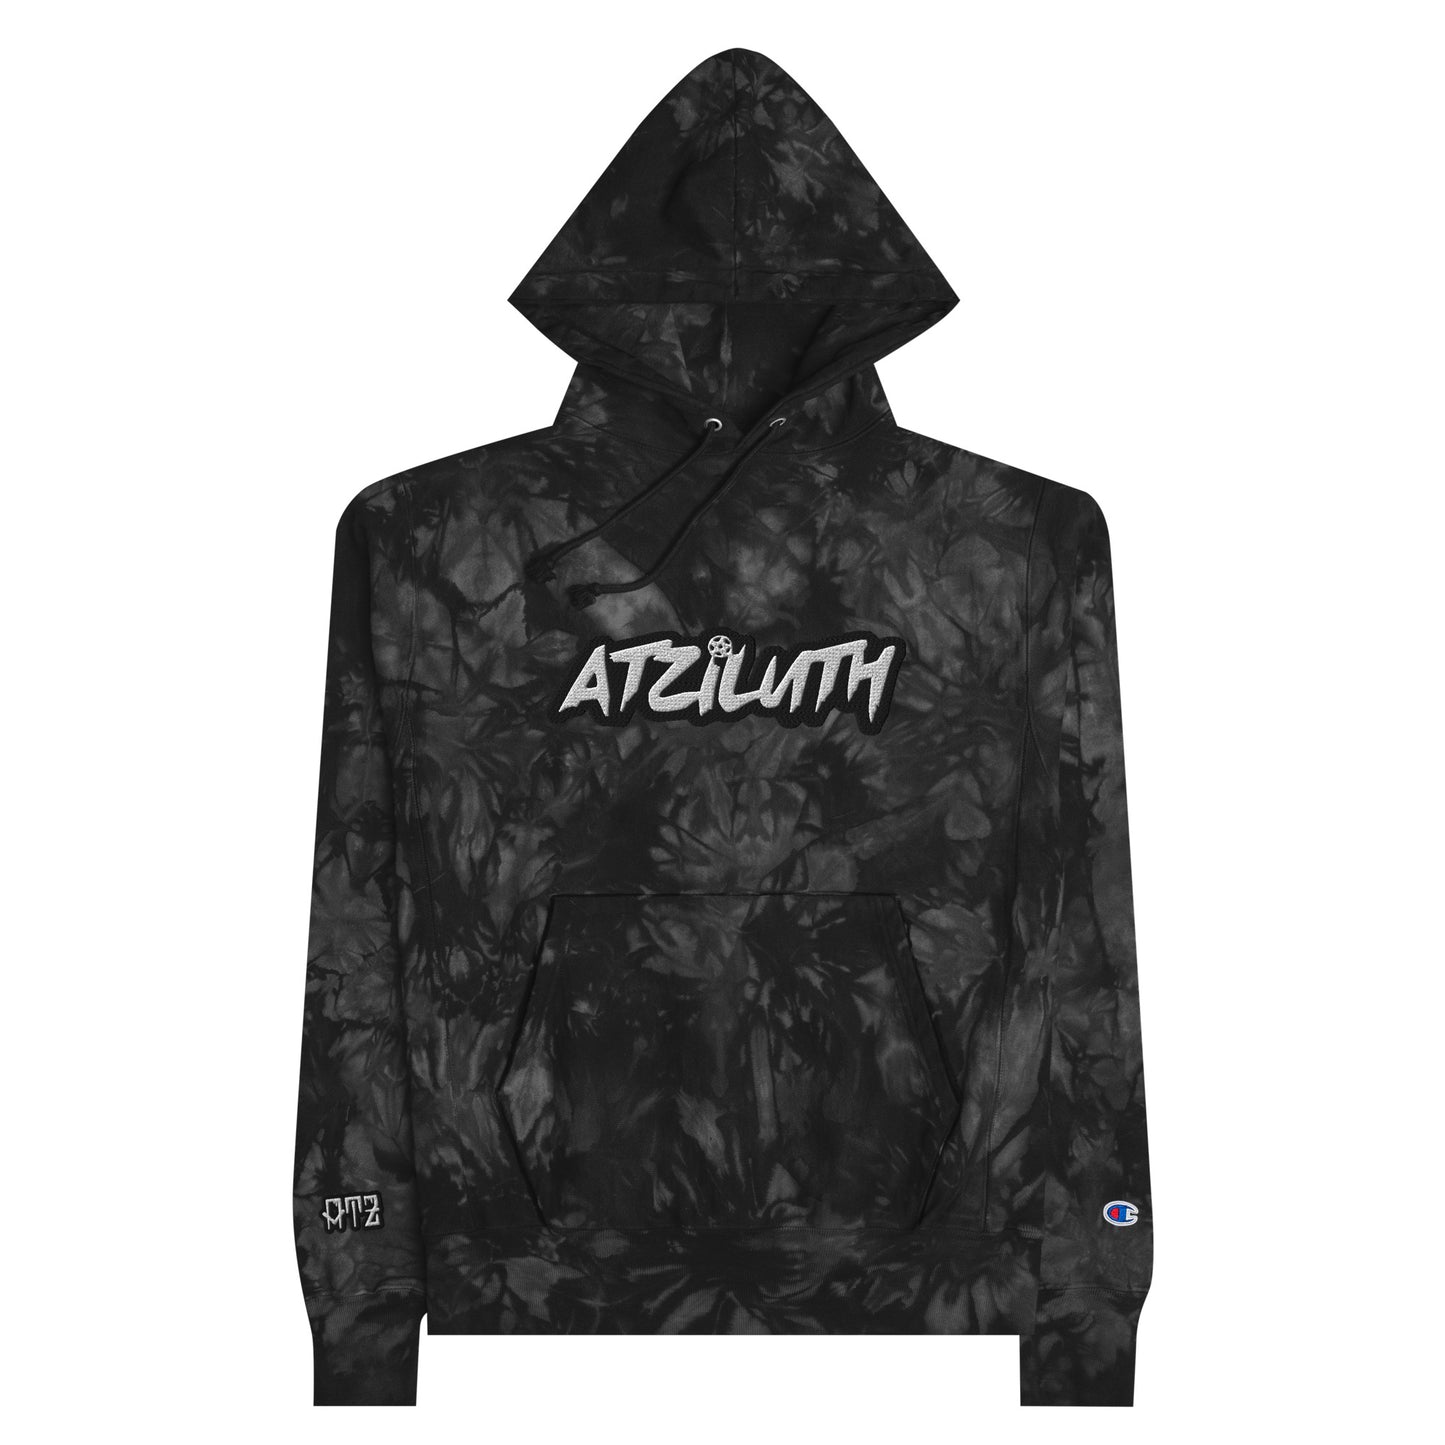 Atziluth Gallery Champion tie-dye hoodie